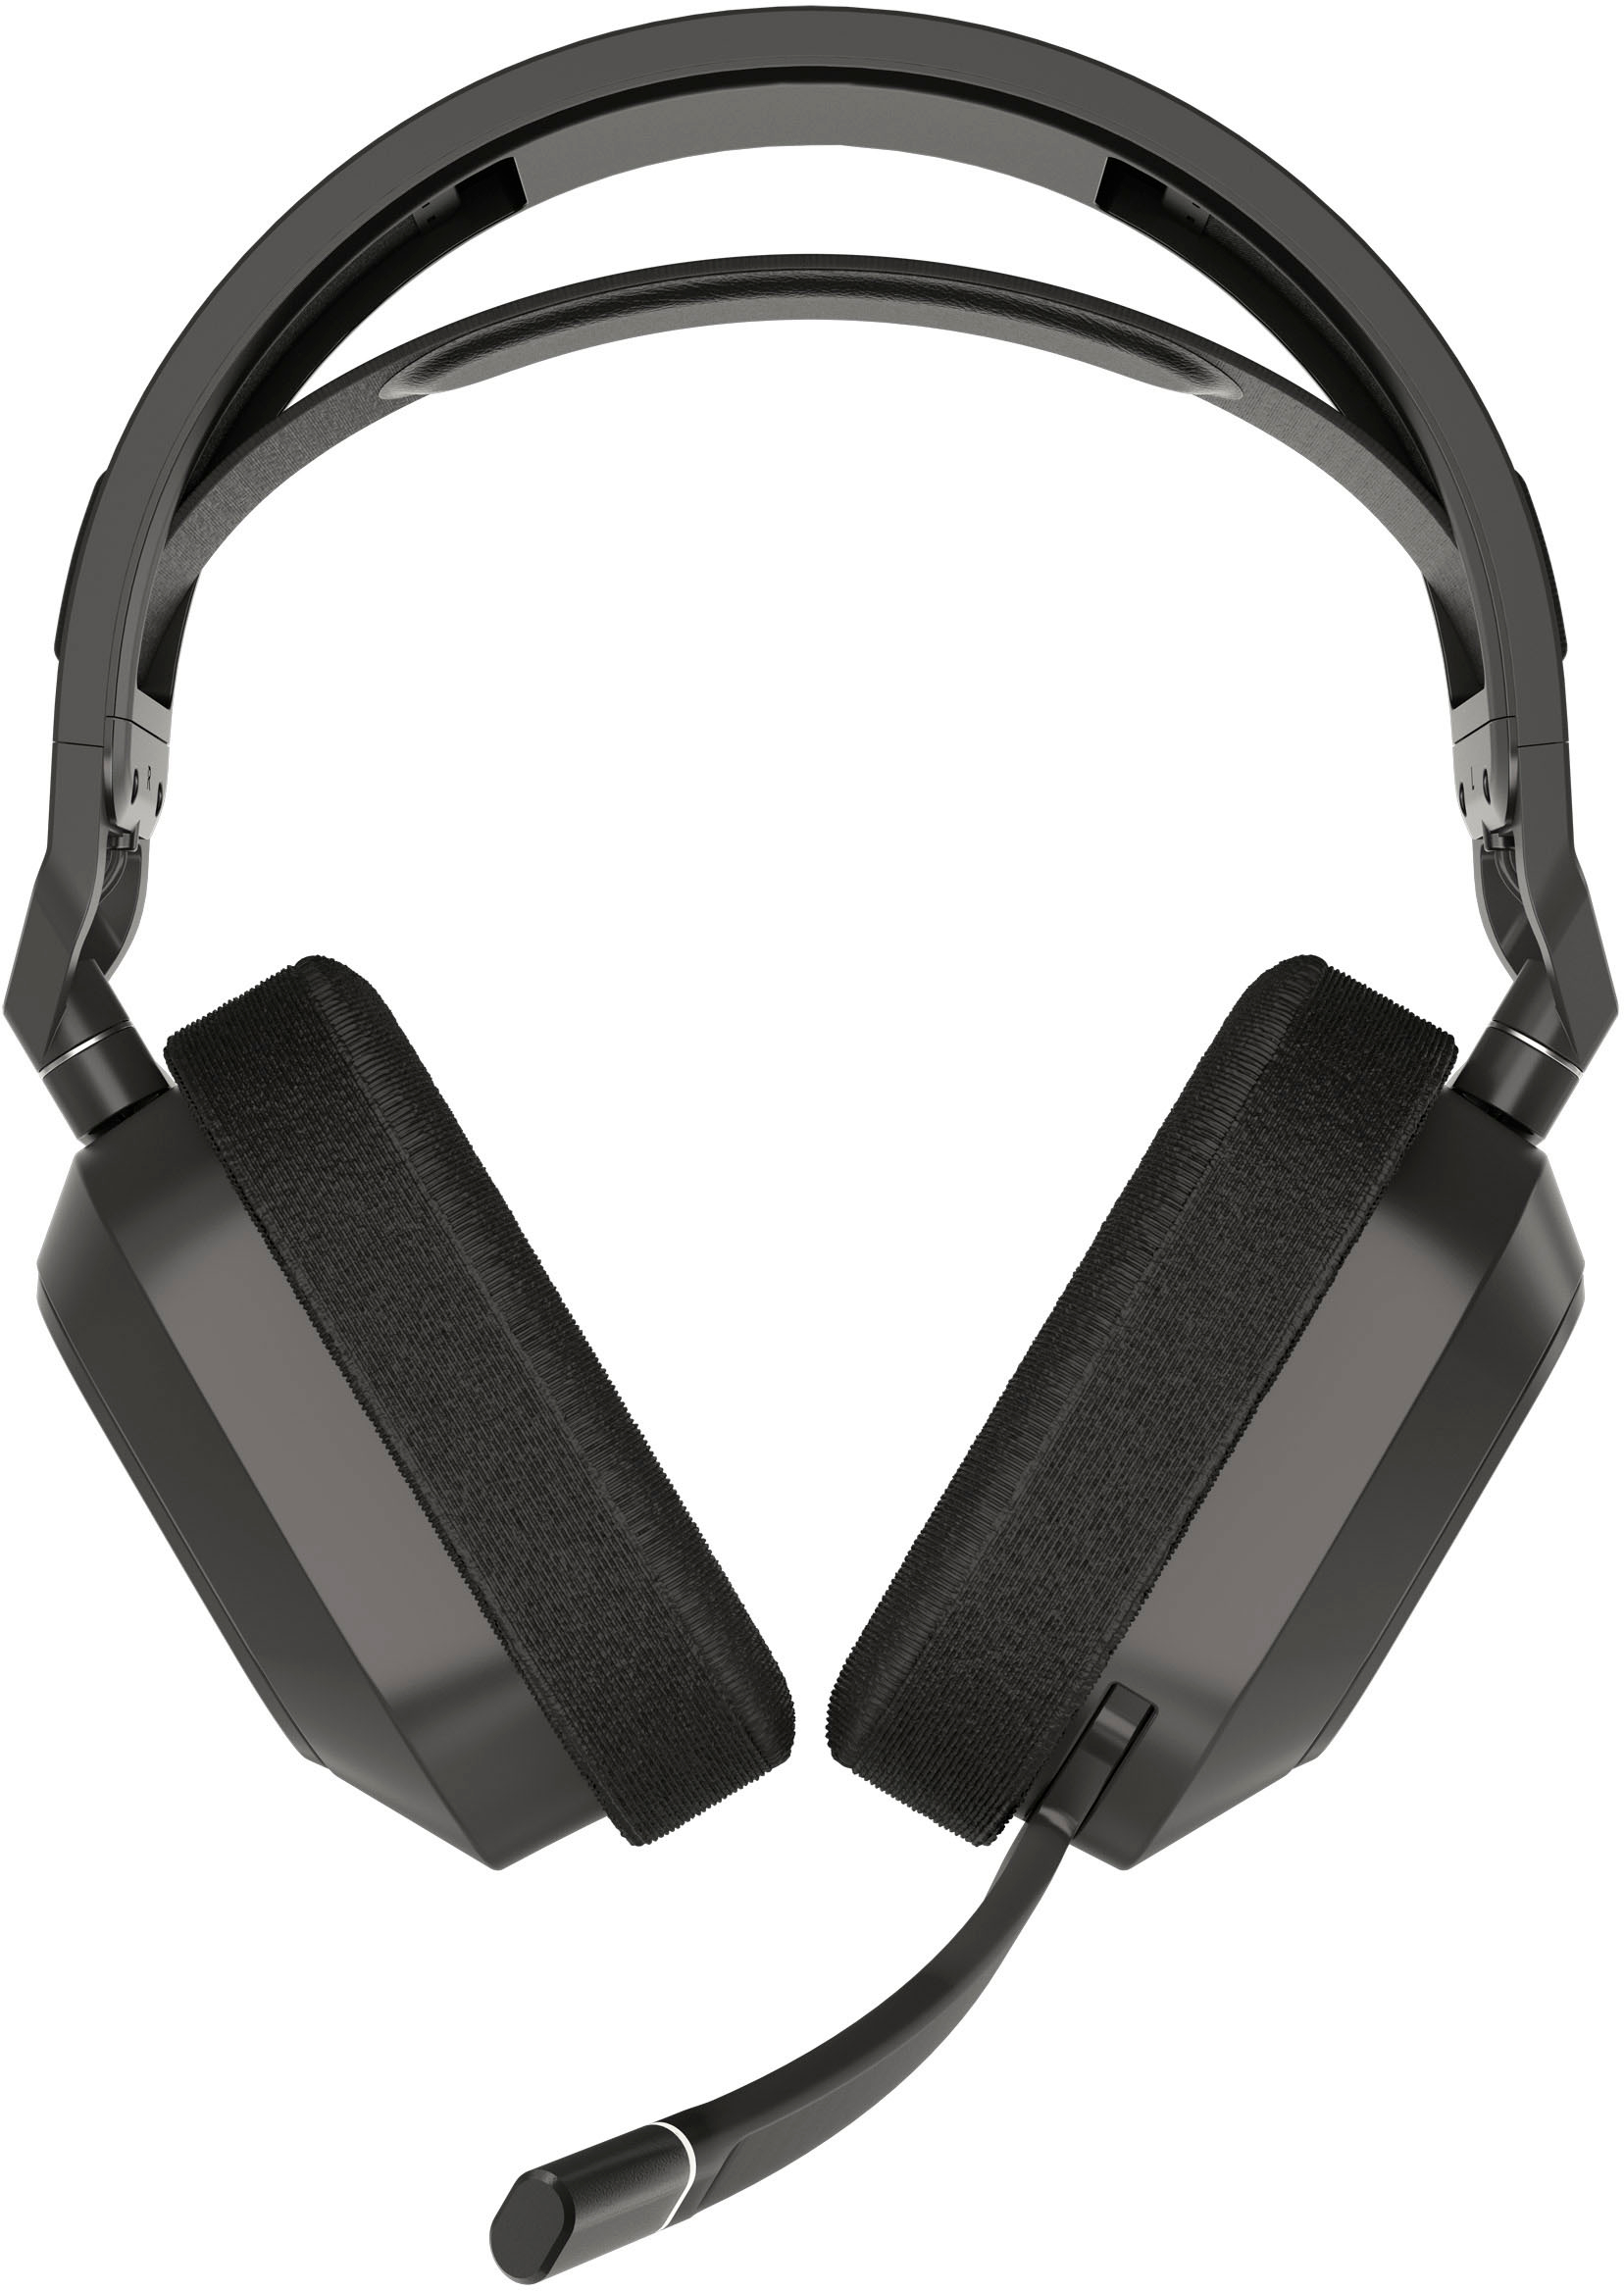 HS80 MAX WIRELESS Gaming Headset, Steel Gray